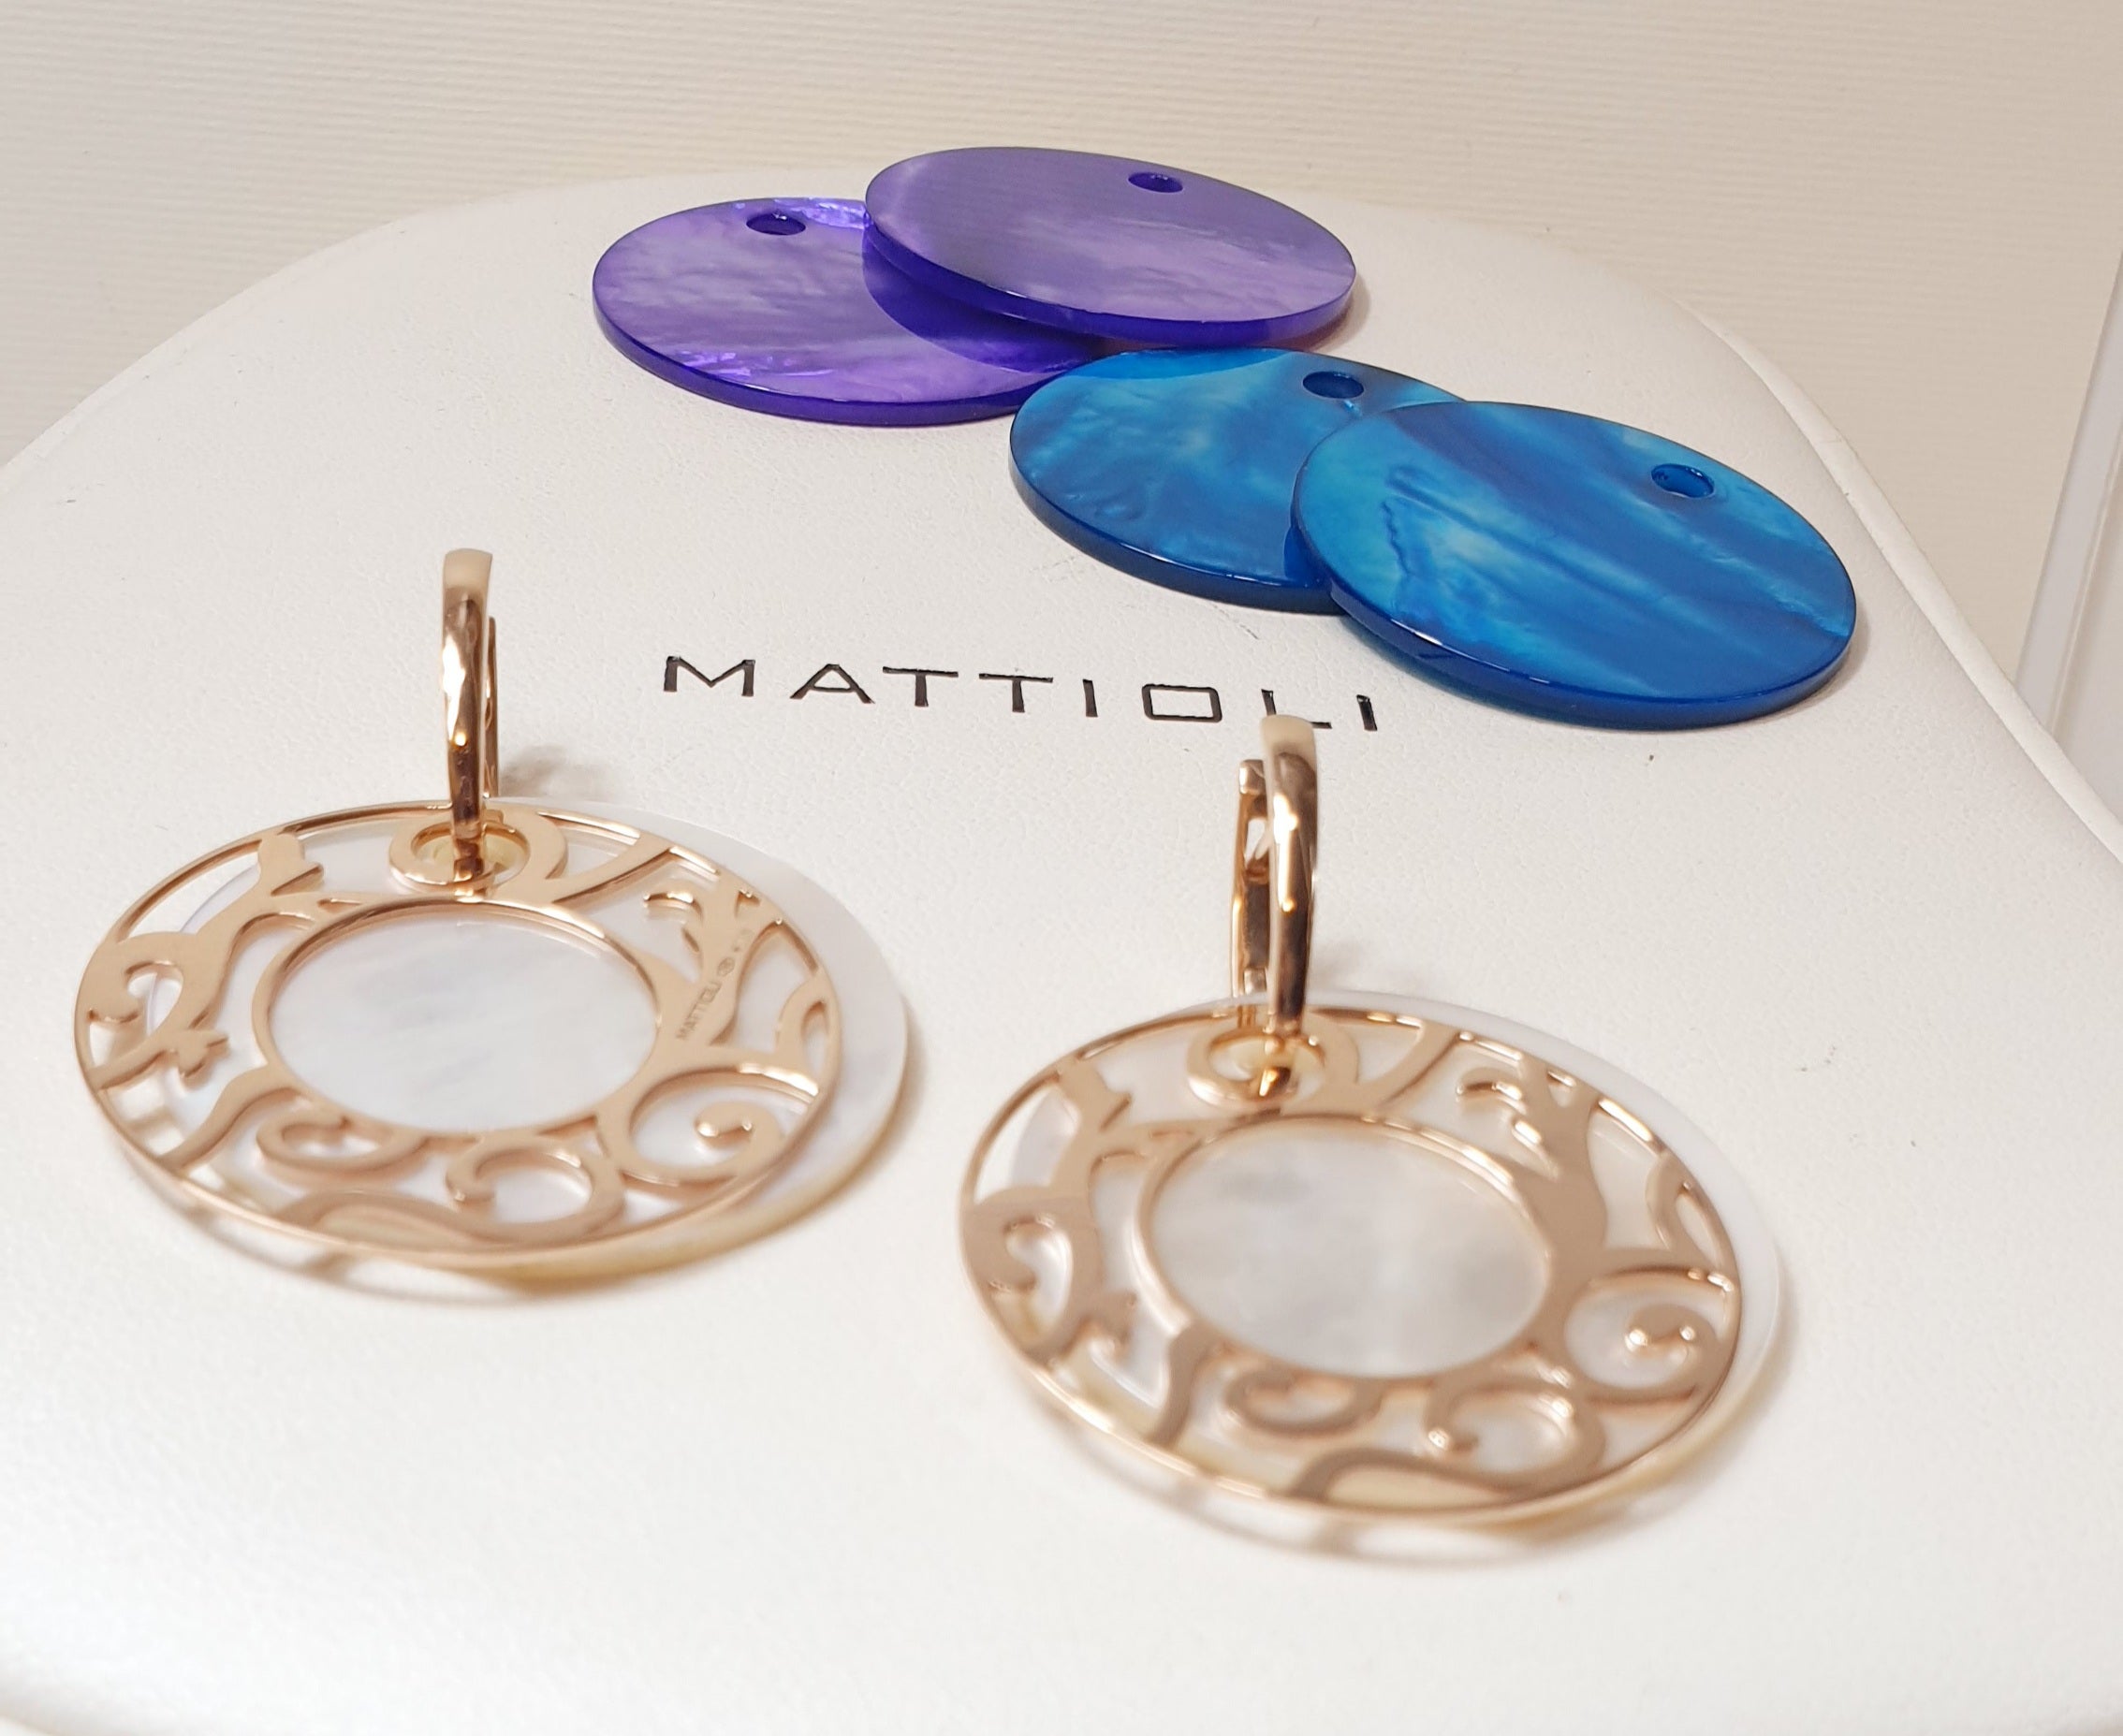 Mattioli Siriana Earrings (35mm) in Rose, Yellow or white 
Gold & 3 Coloured Mother of Pearl Pieces.
Gold Weight: 12
Diameter: 35mm/1.37in

Important information for this ORDER !
Request availability if in stock inmediate shipping
If need production